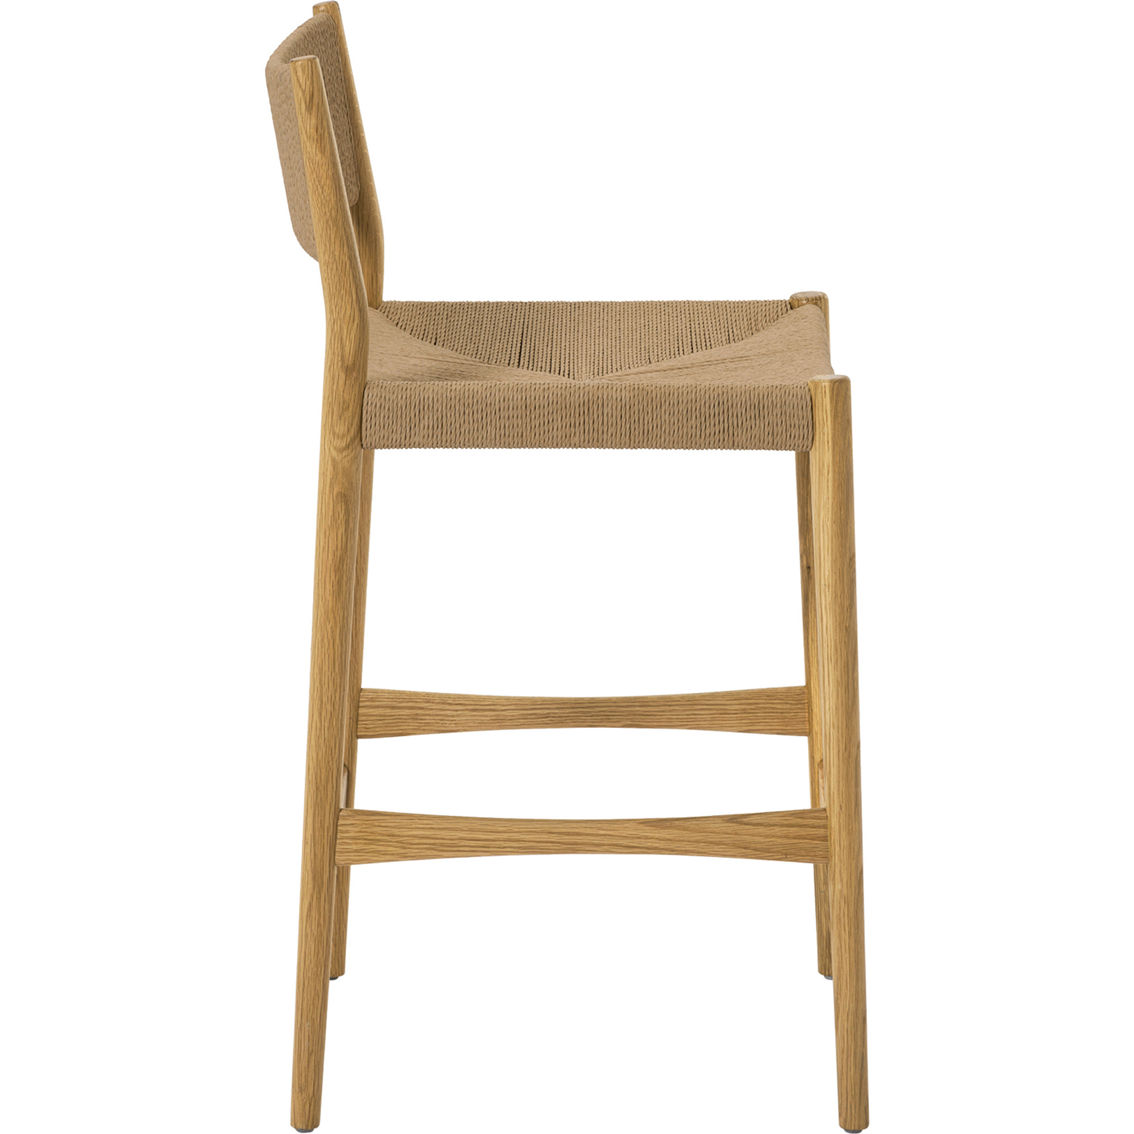 Armen Living Erie Woven Paper Cord and Oak Wood Barstool - Image 4 of 10